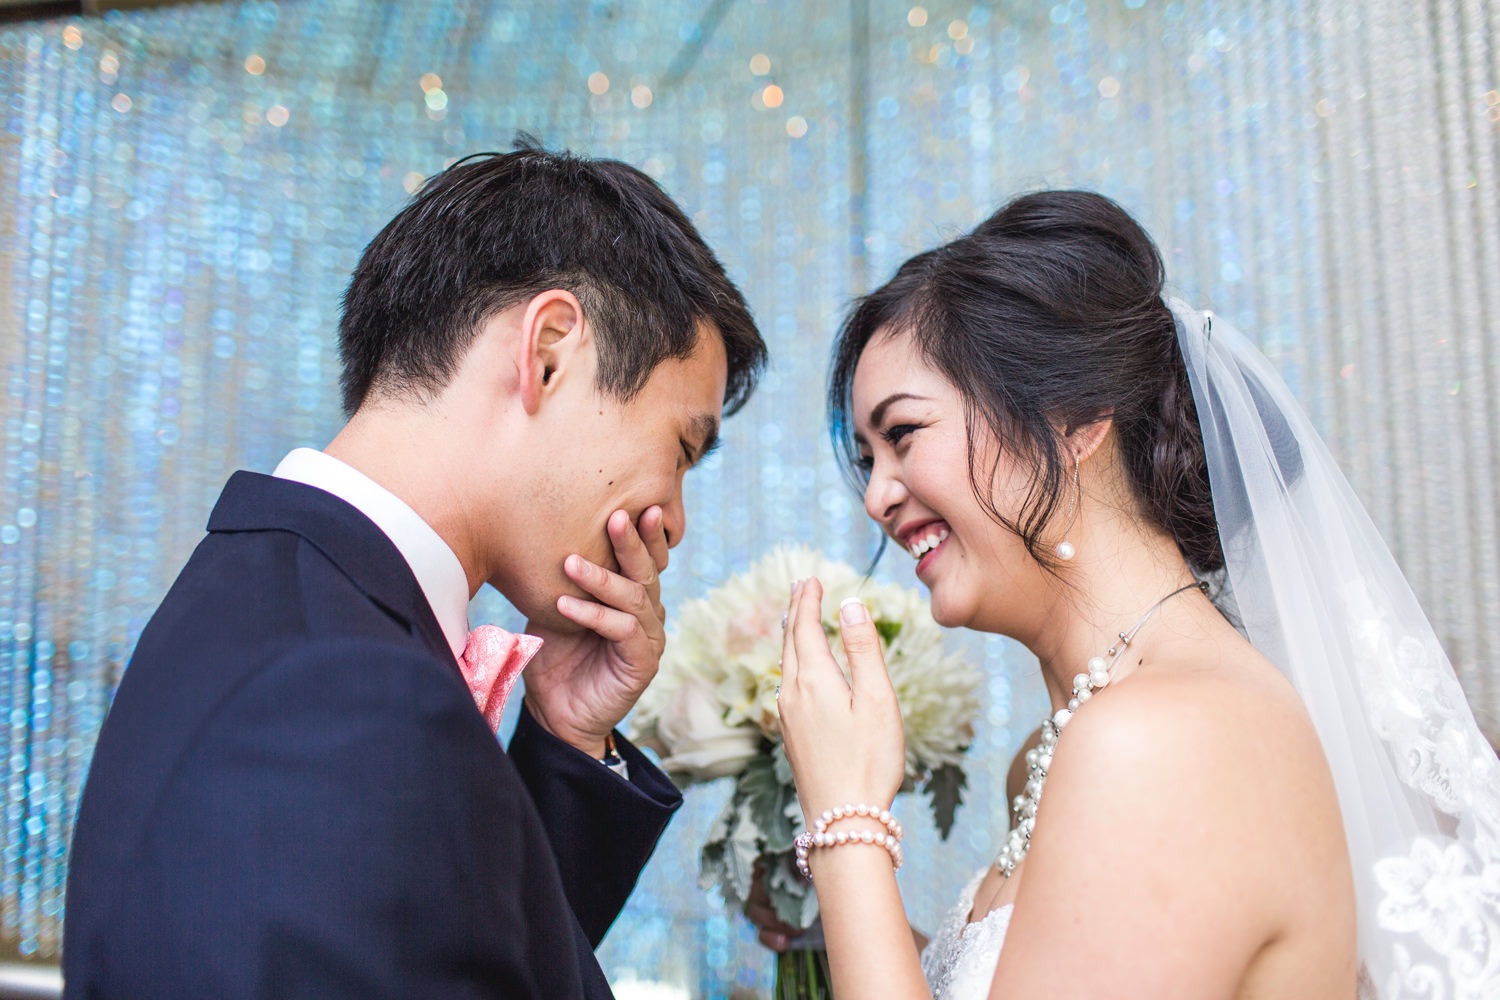 First looks can be emotional moments at weddings